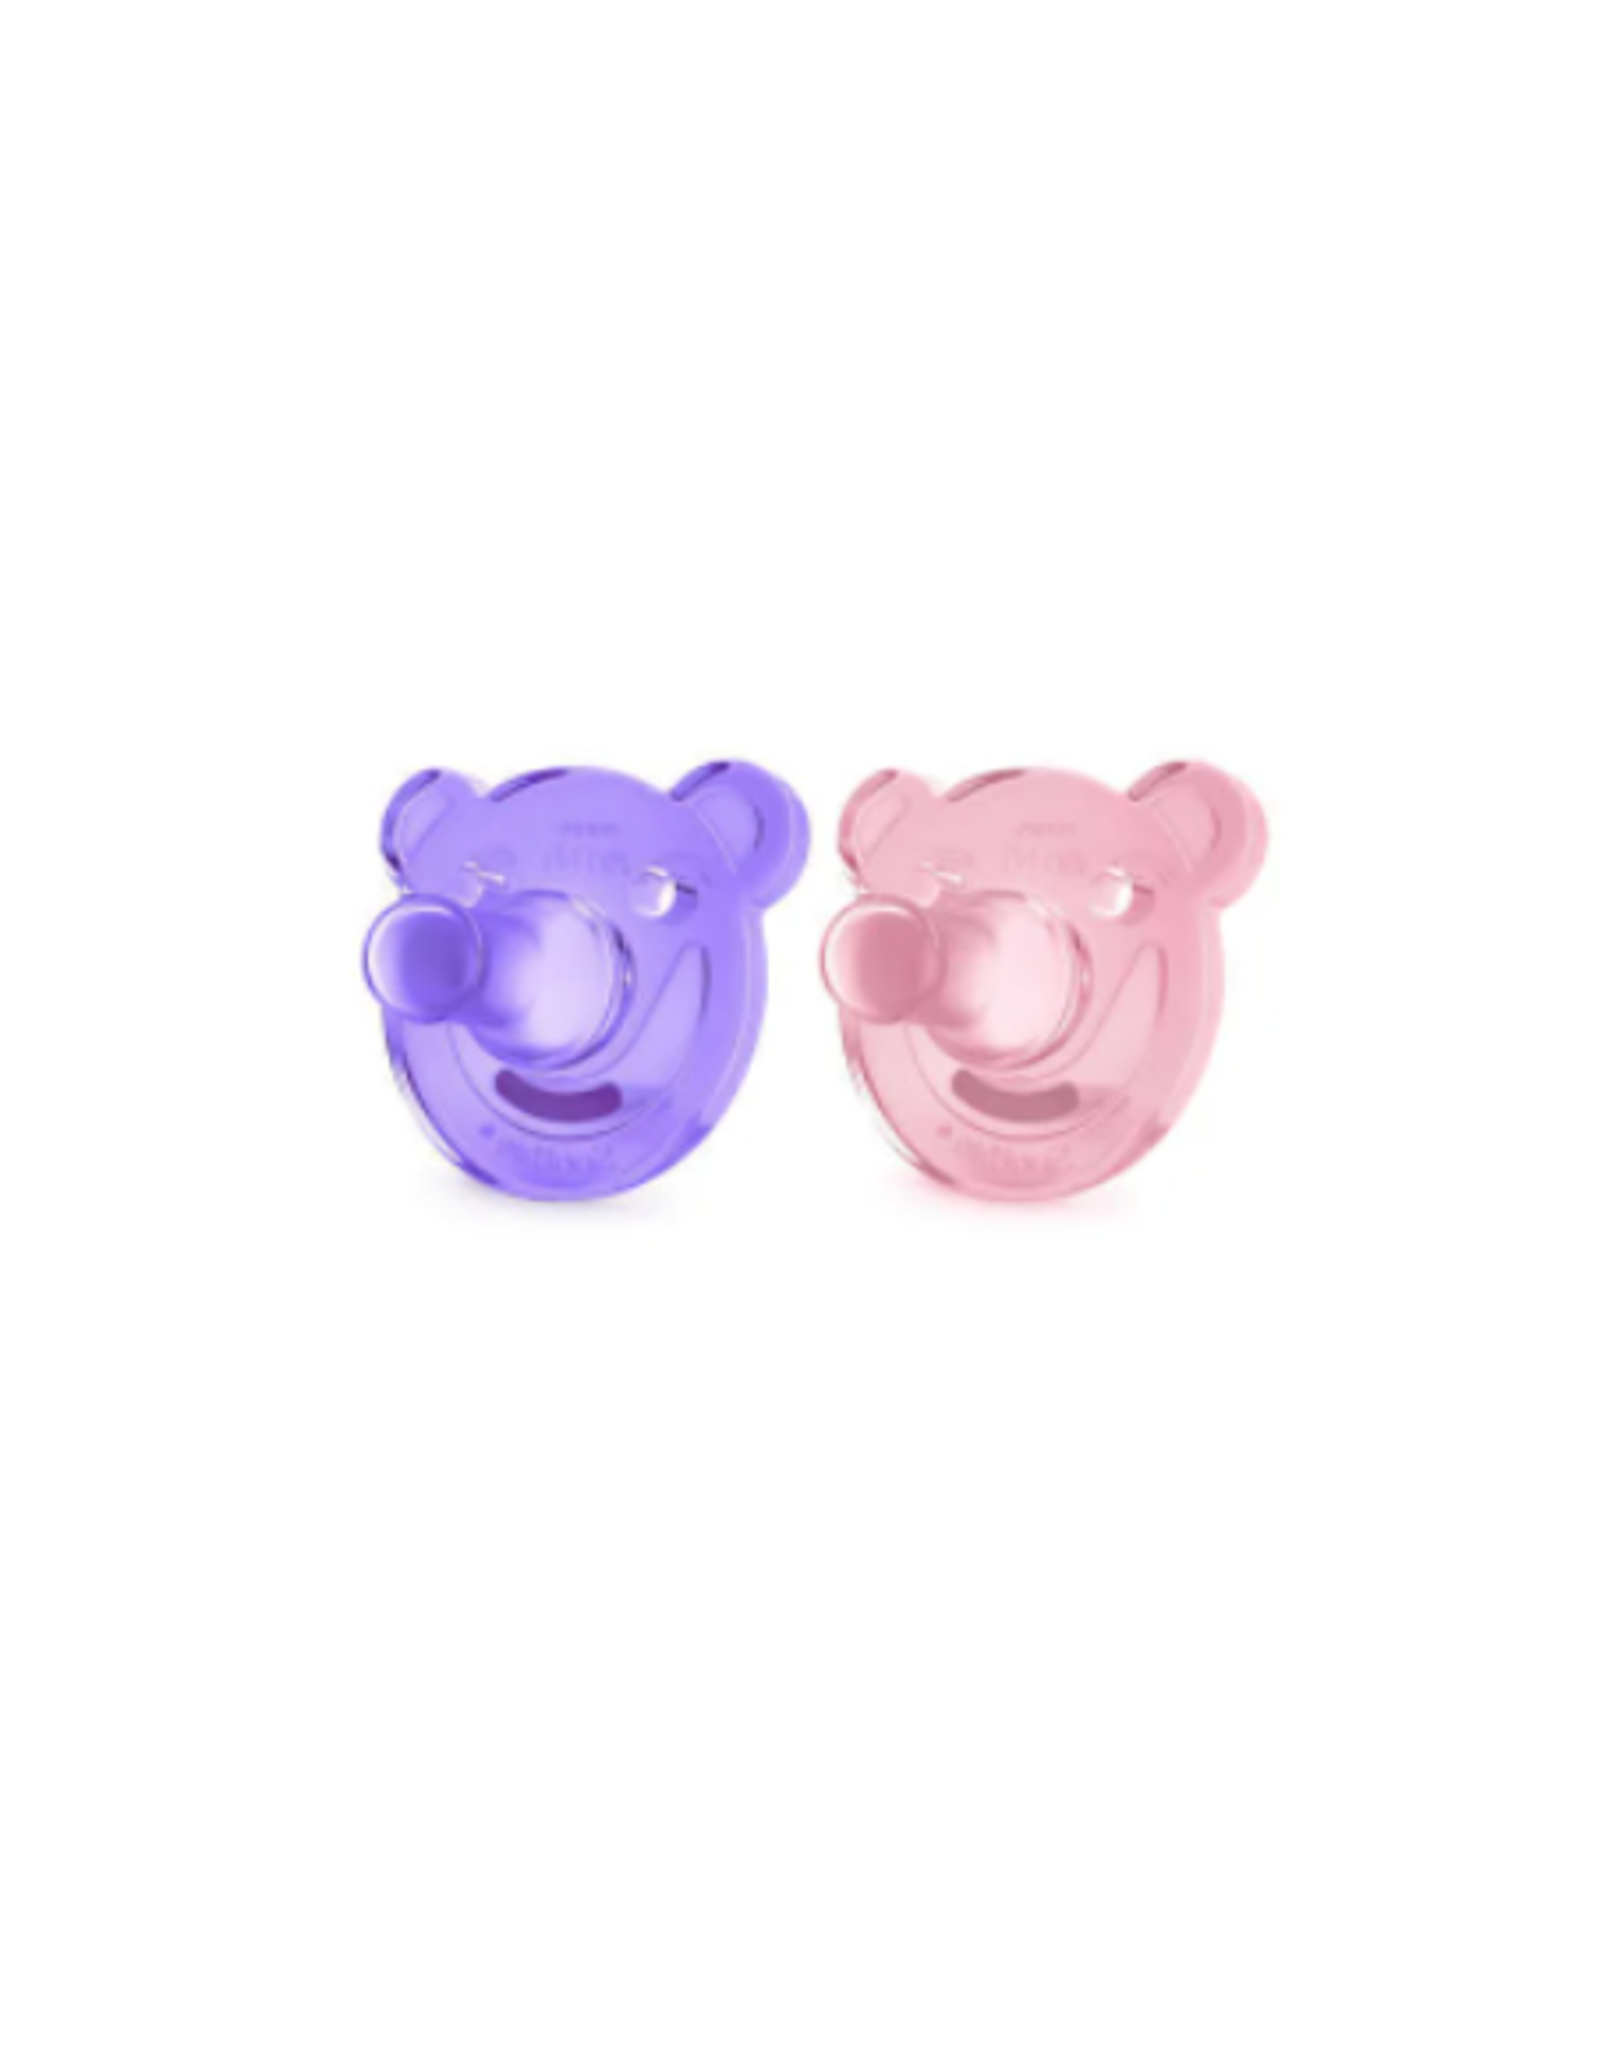 Philips AVENT Soothie Shapes Pacifier 0-3m 2pk, Purple/Pink One Size